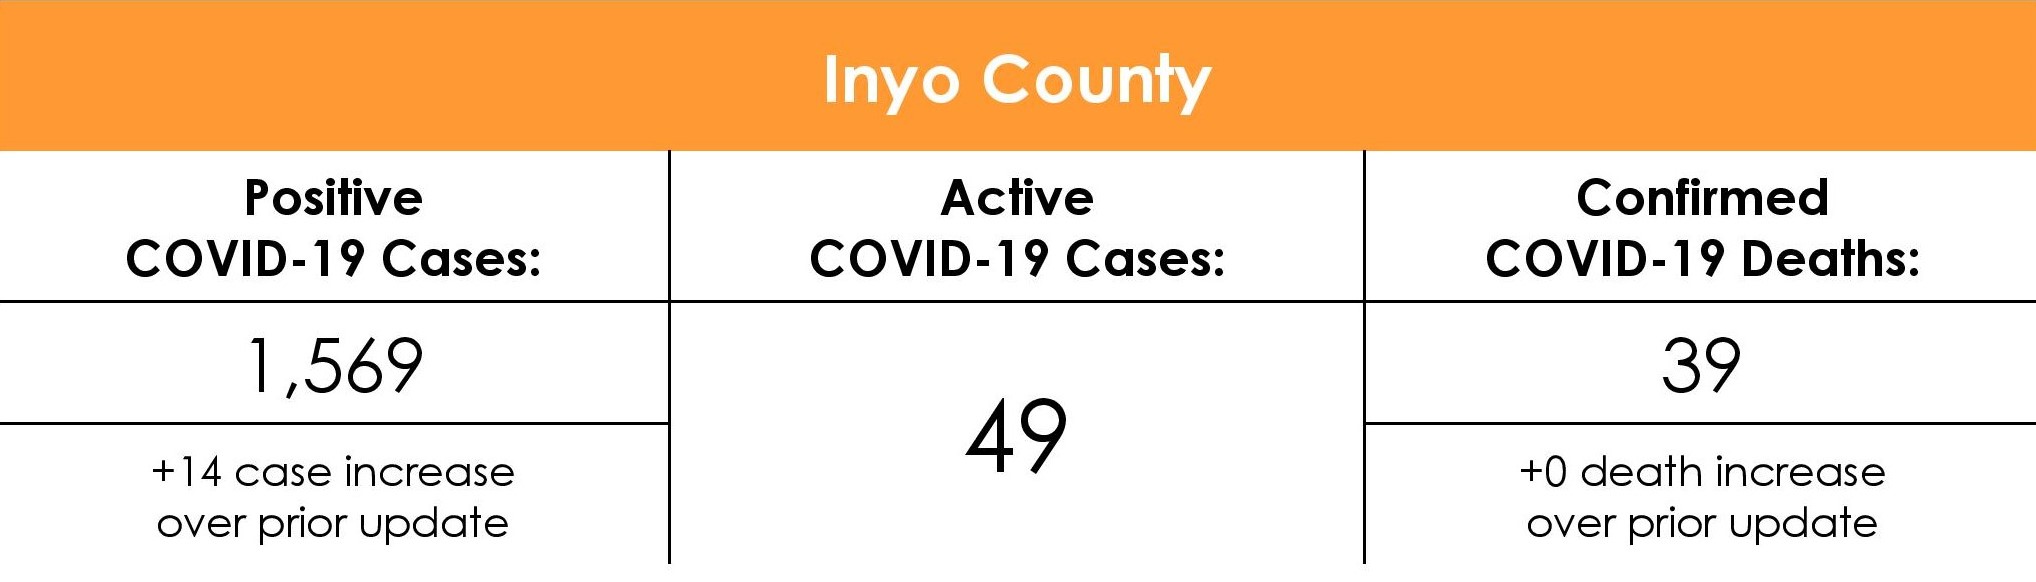 Inyo County COVID-19 Case Rate as of August 30th, 2021